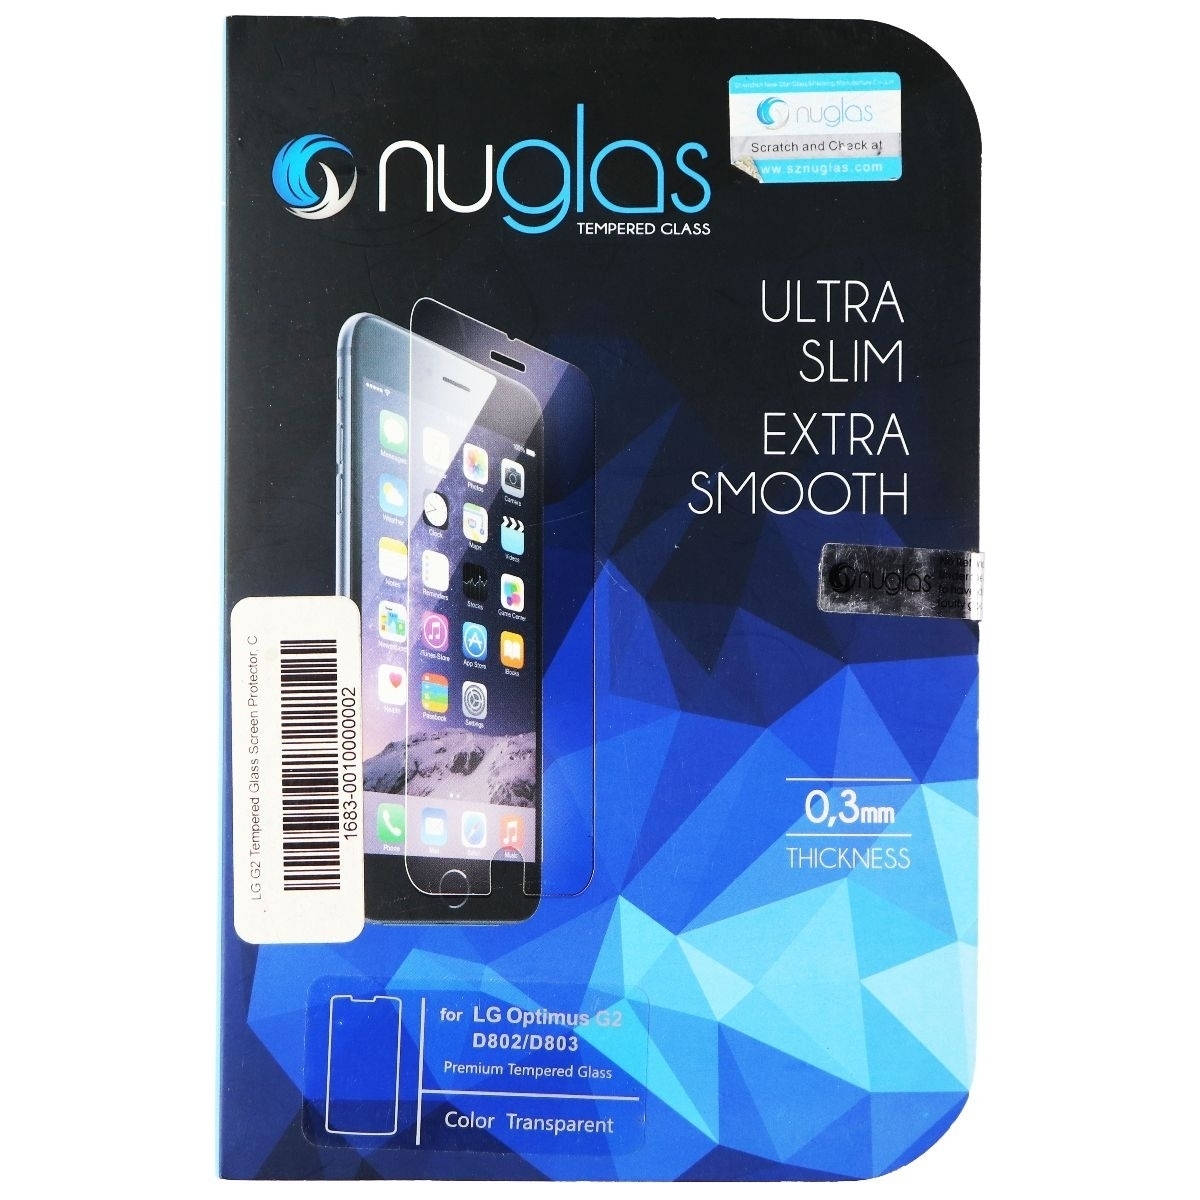 NuGlas Tempered Glass Screen Protector For LG Optimus G2 D802/D803 - Clear